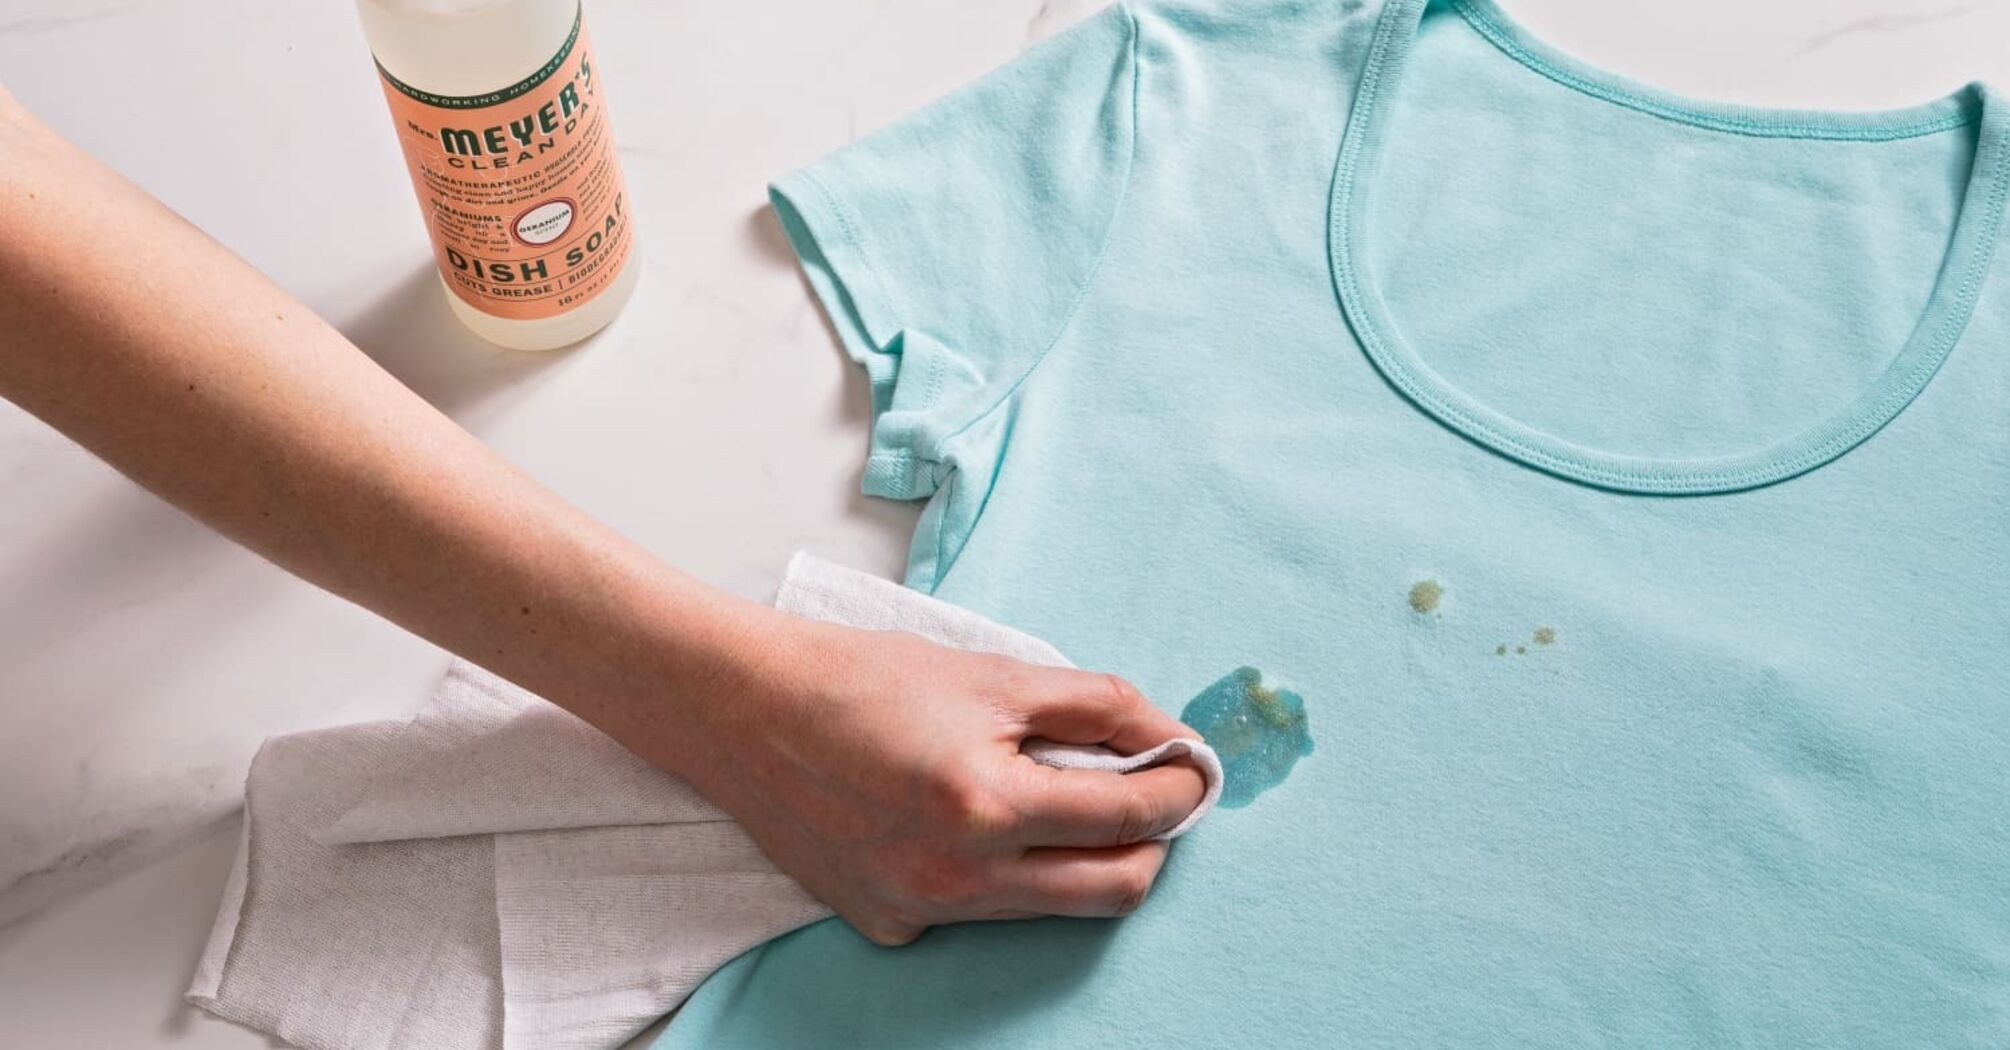 How to quickly remove grease stains on clothes